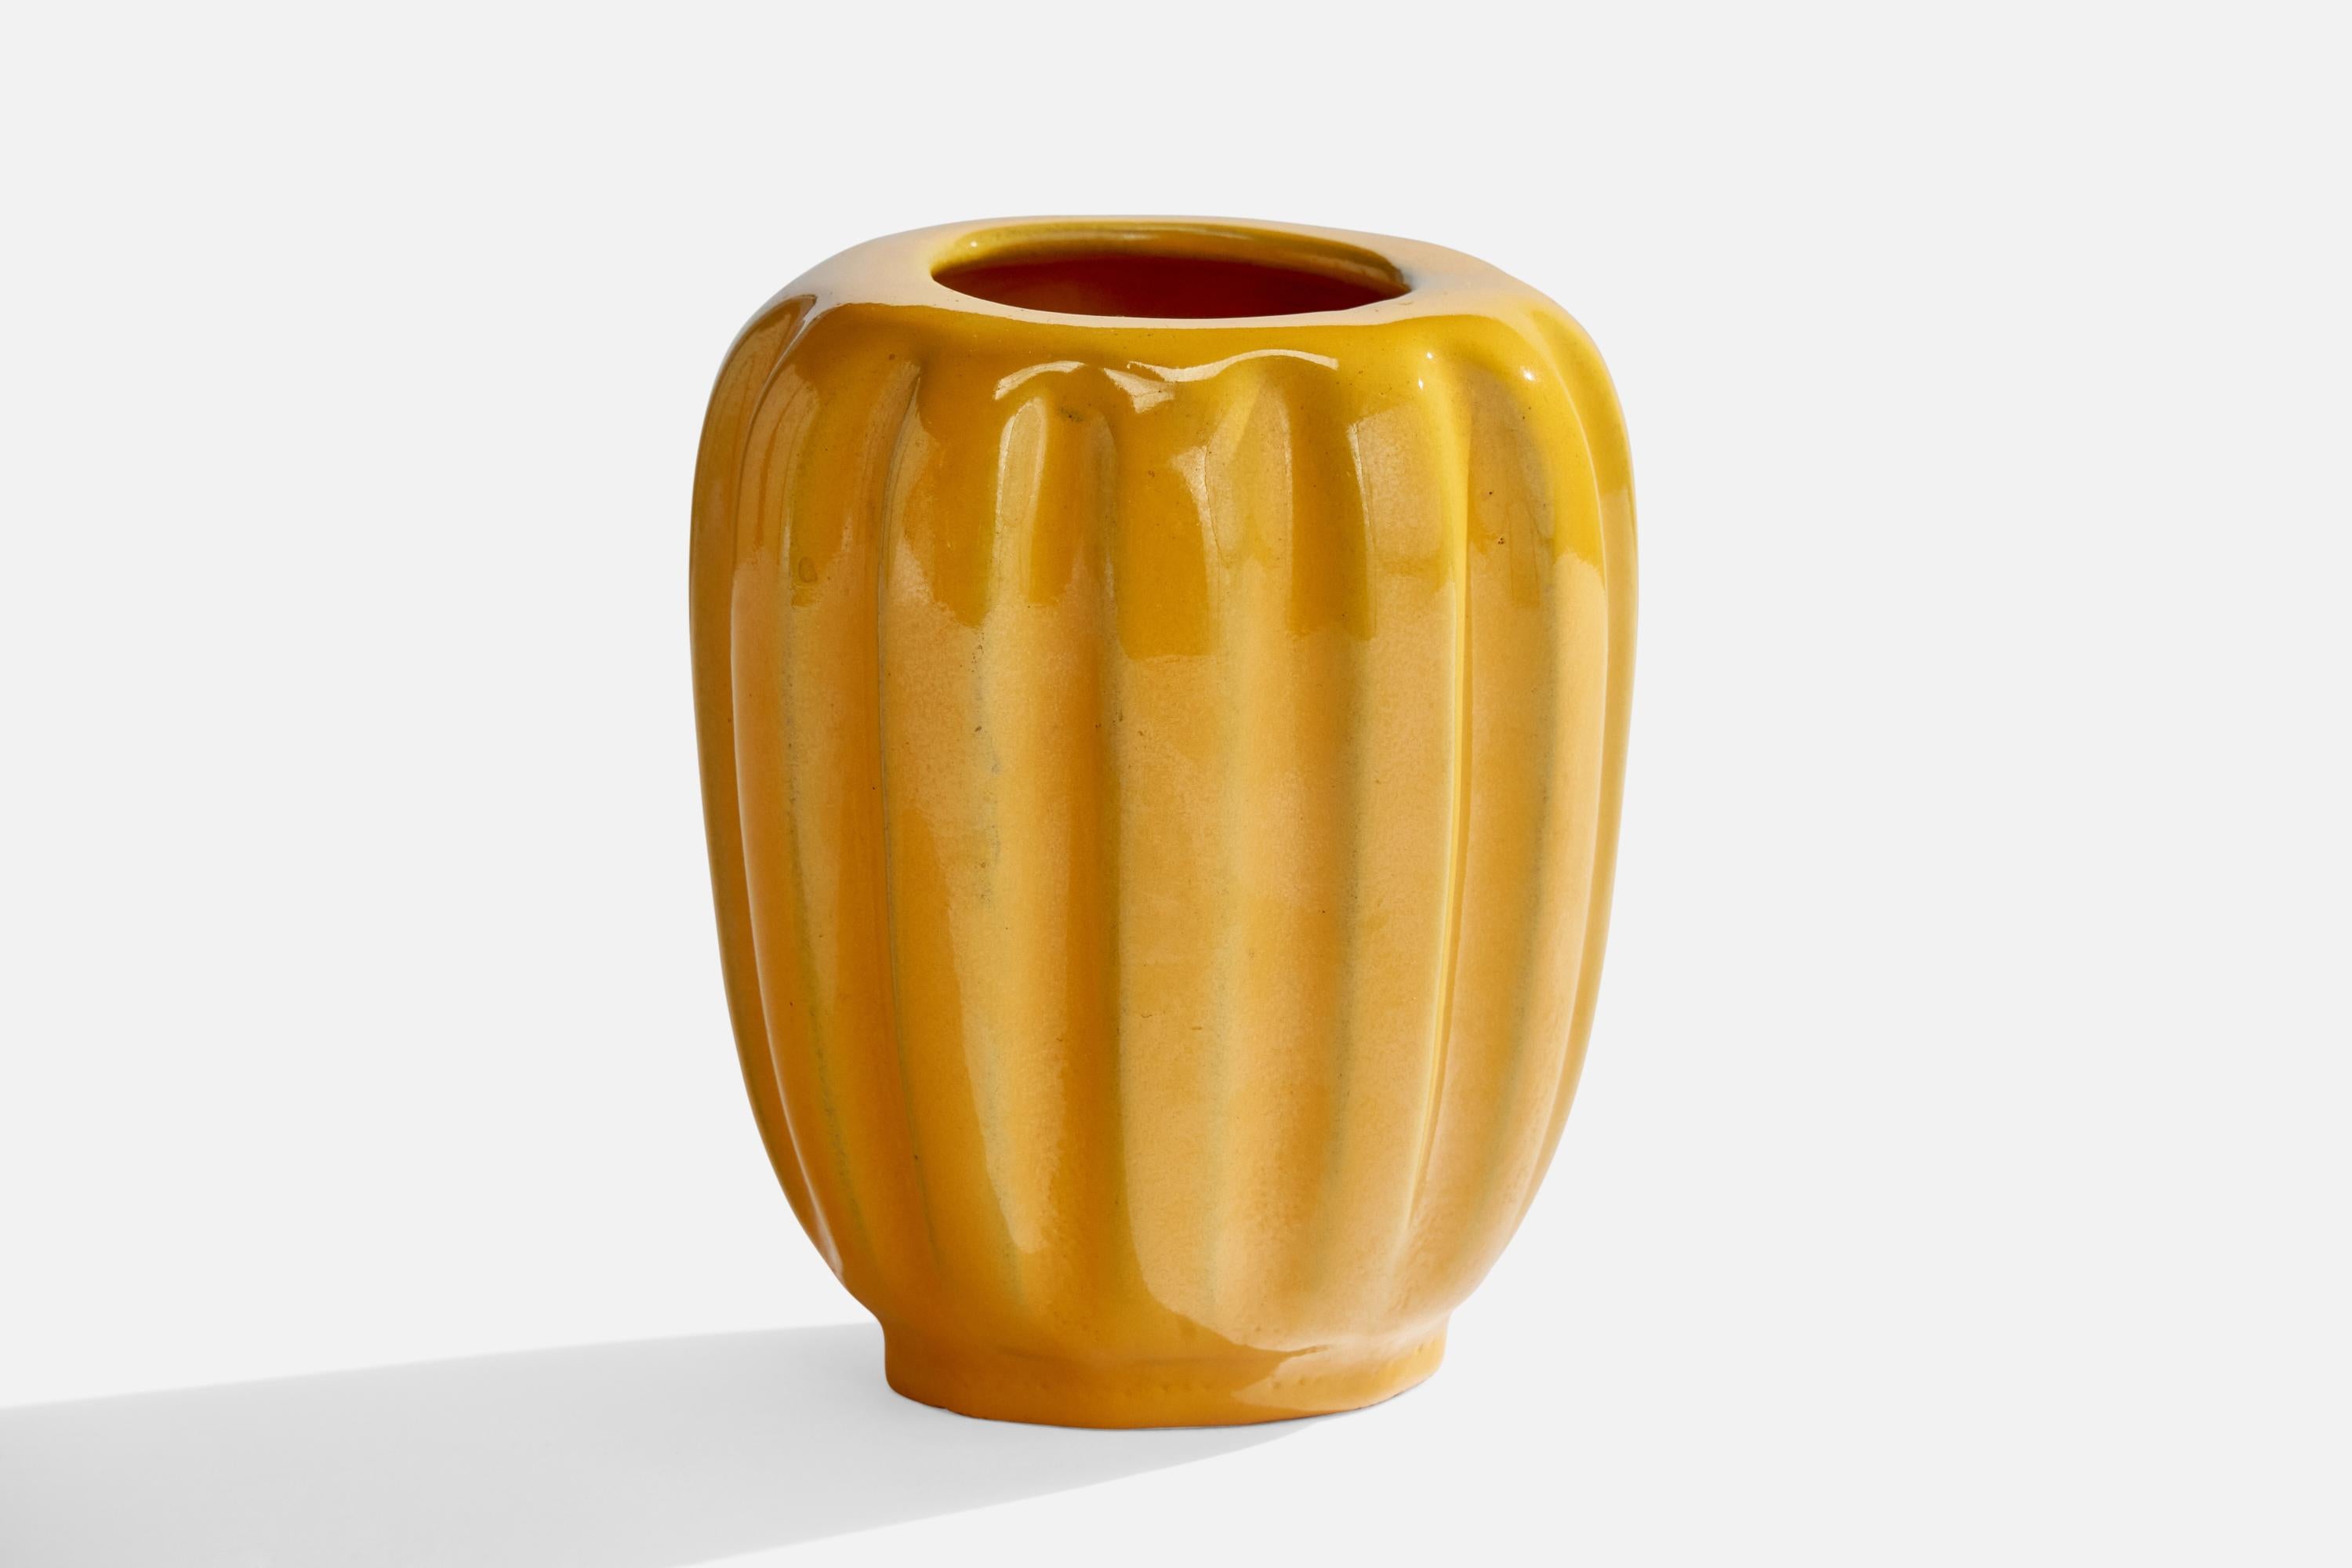 A yellow-glazed earthenware vase designed and produced by Upsala Ekeby, Sweden, 1930s.